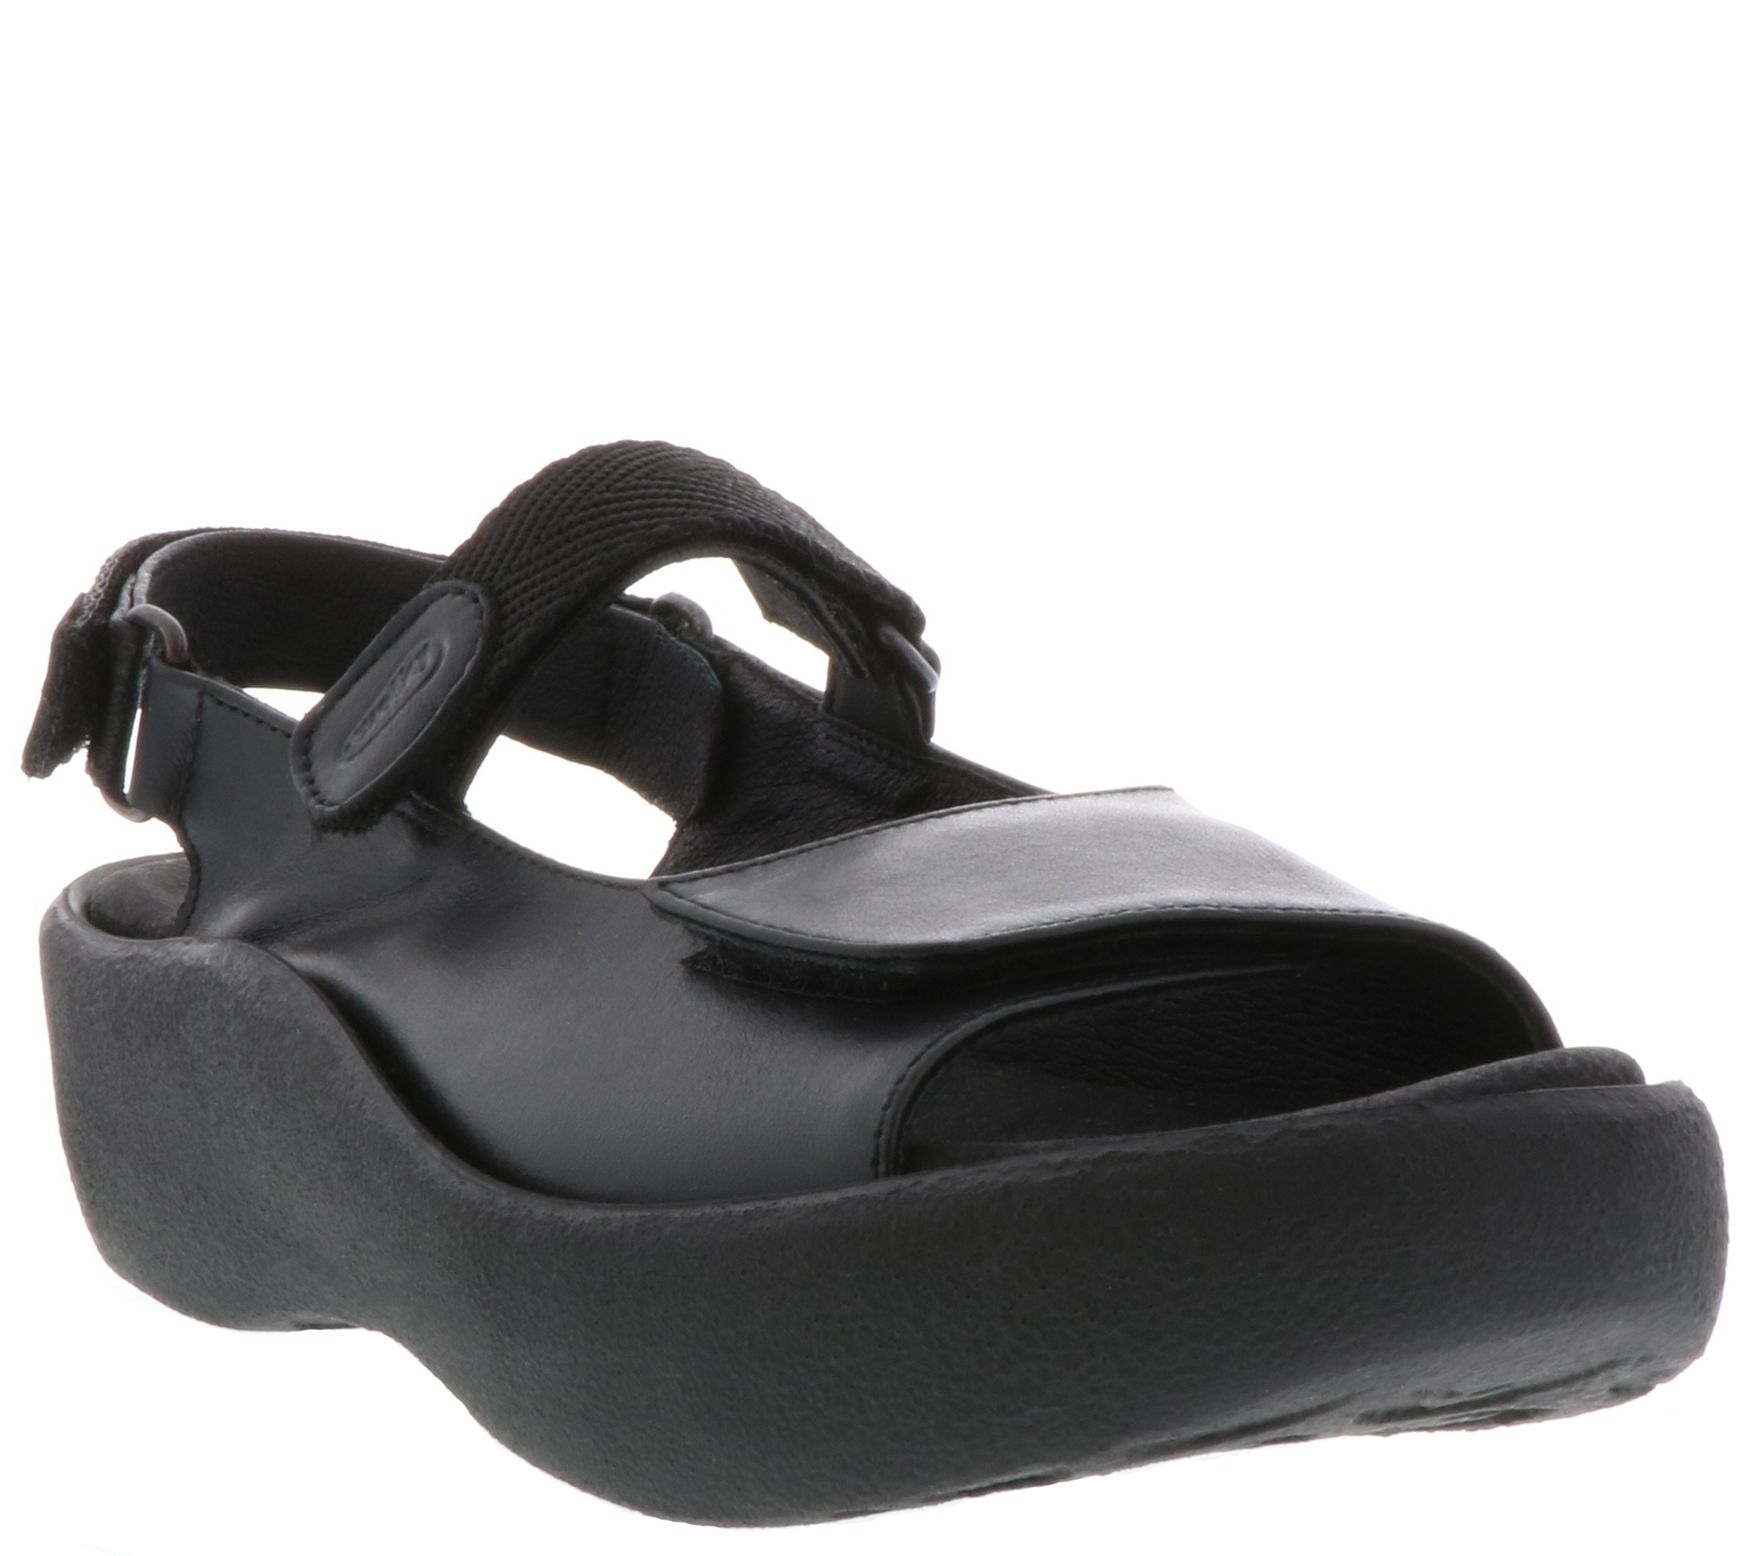 sandals with removable footbed